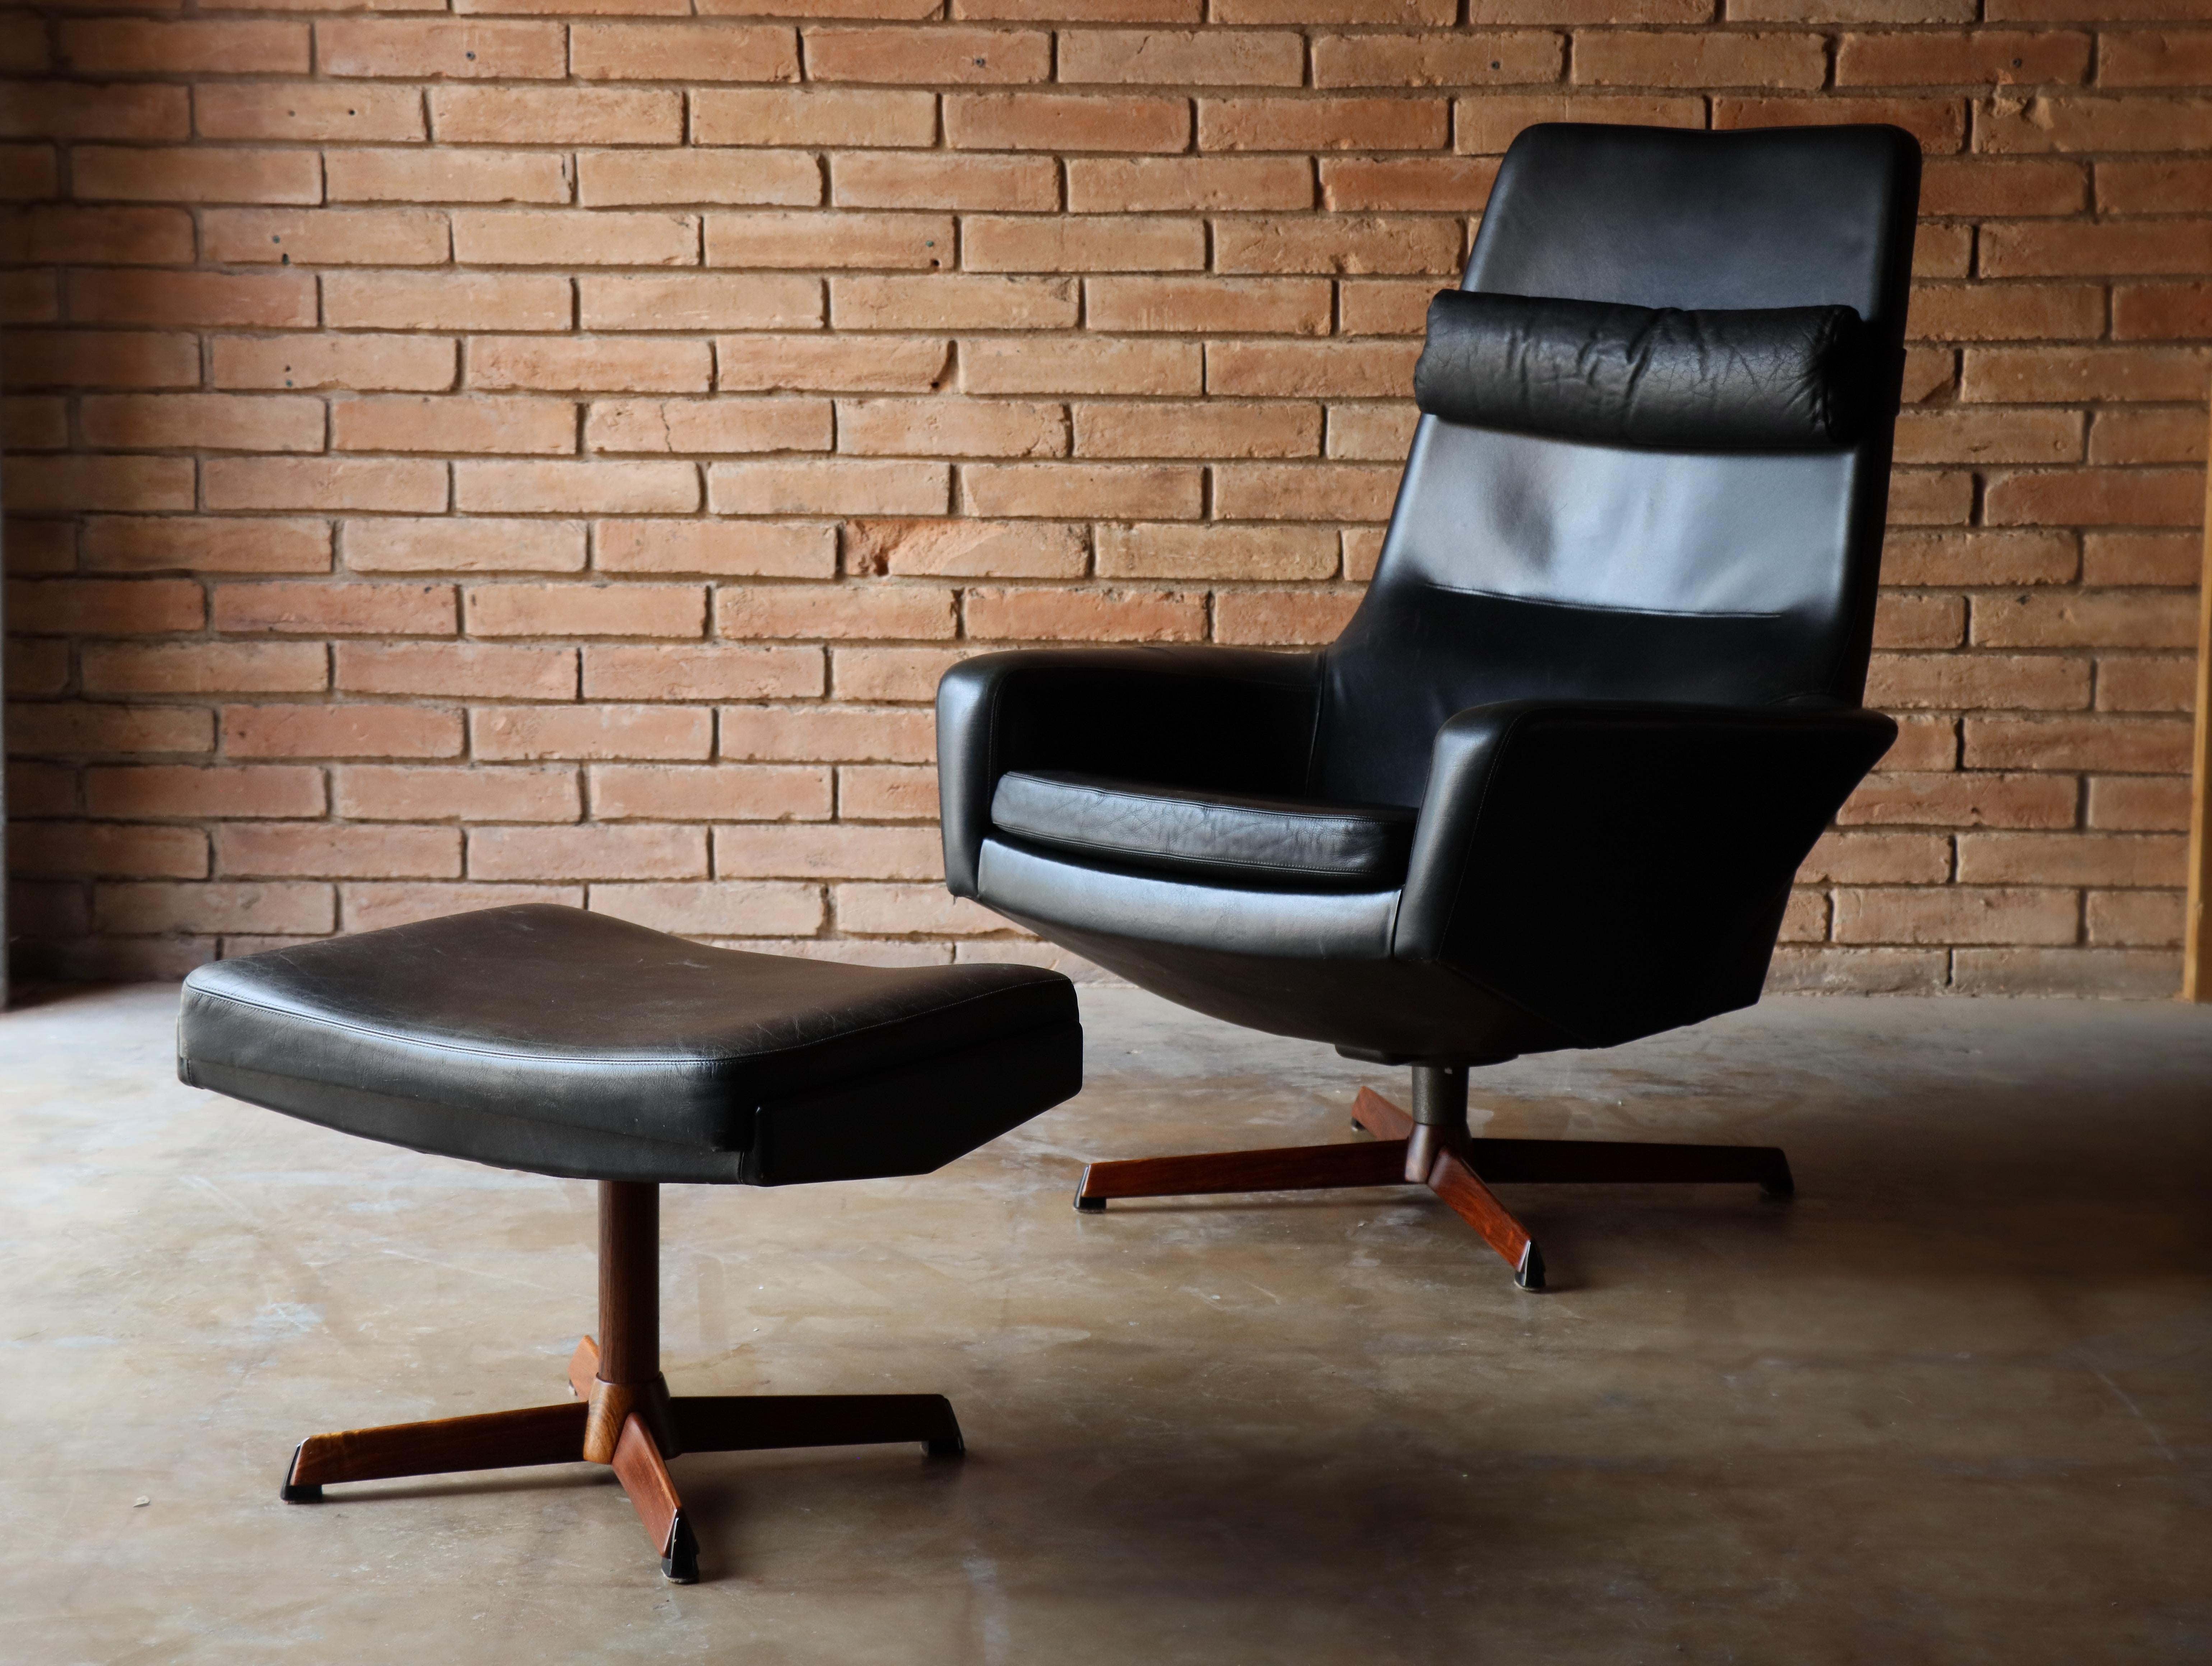 Reclining leather and Brazilian rosewood lounge chair and ottoman designed by Ib Madsen & Acton Schubell for their company Madsen & Schübell. Denmark, c.1950s. Model MS-30 

Often misattributed to Ib Kofod Larsen, this example features high quality